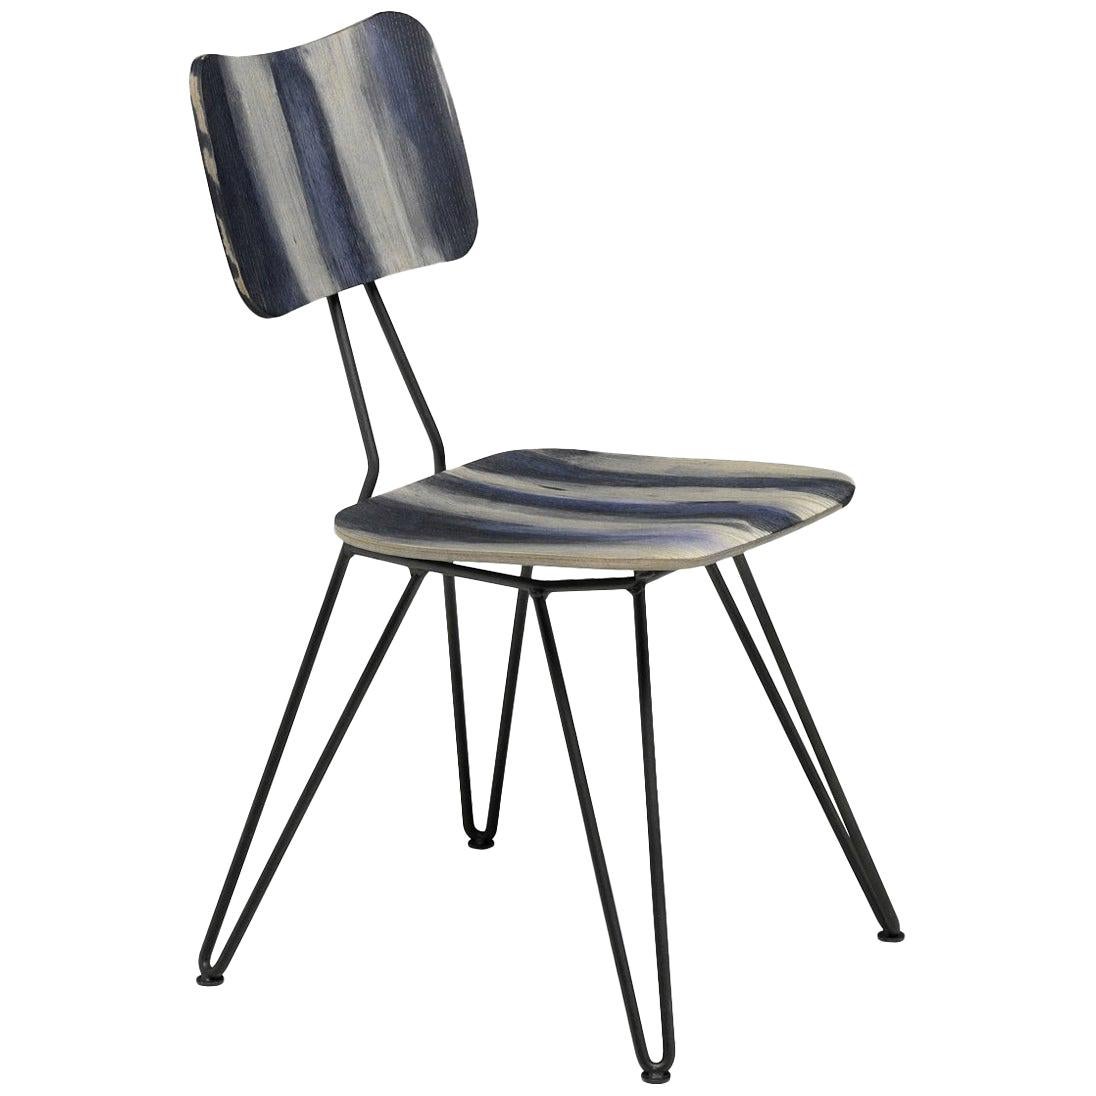 "Overdyed" Aniline Dyed Ash Plywood Shell and Steel Chair by Moroso for Diesel